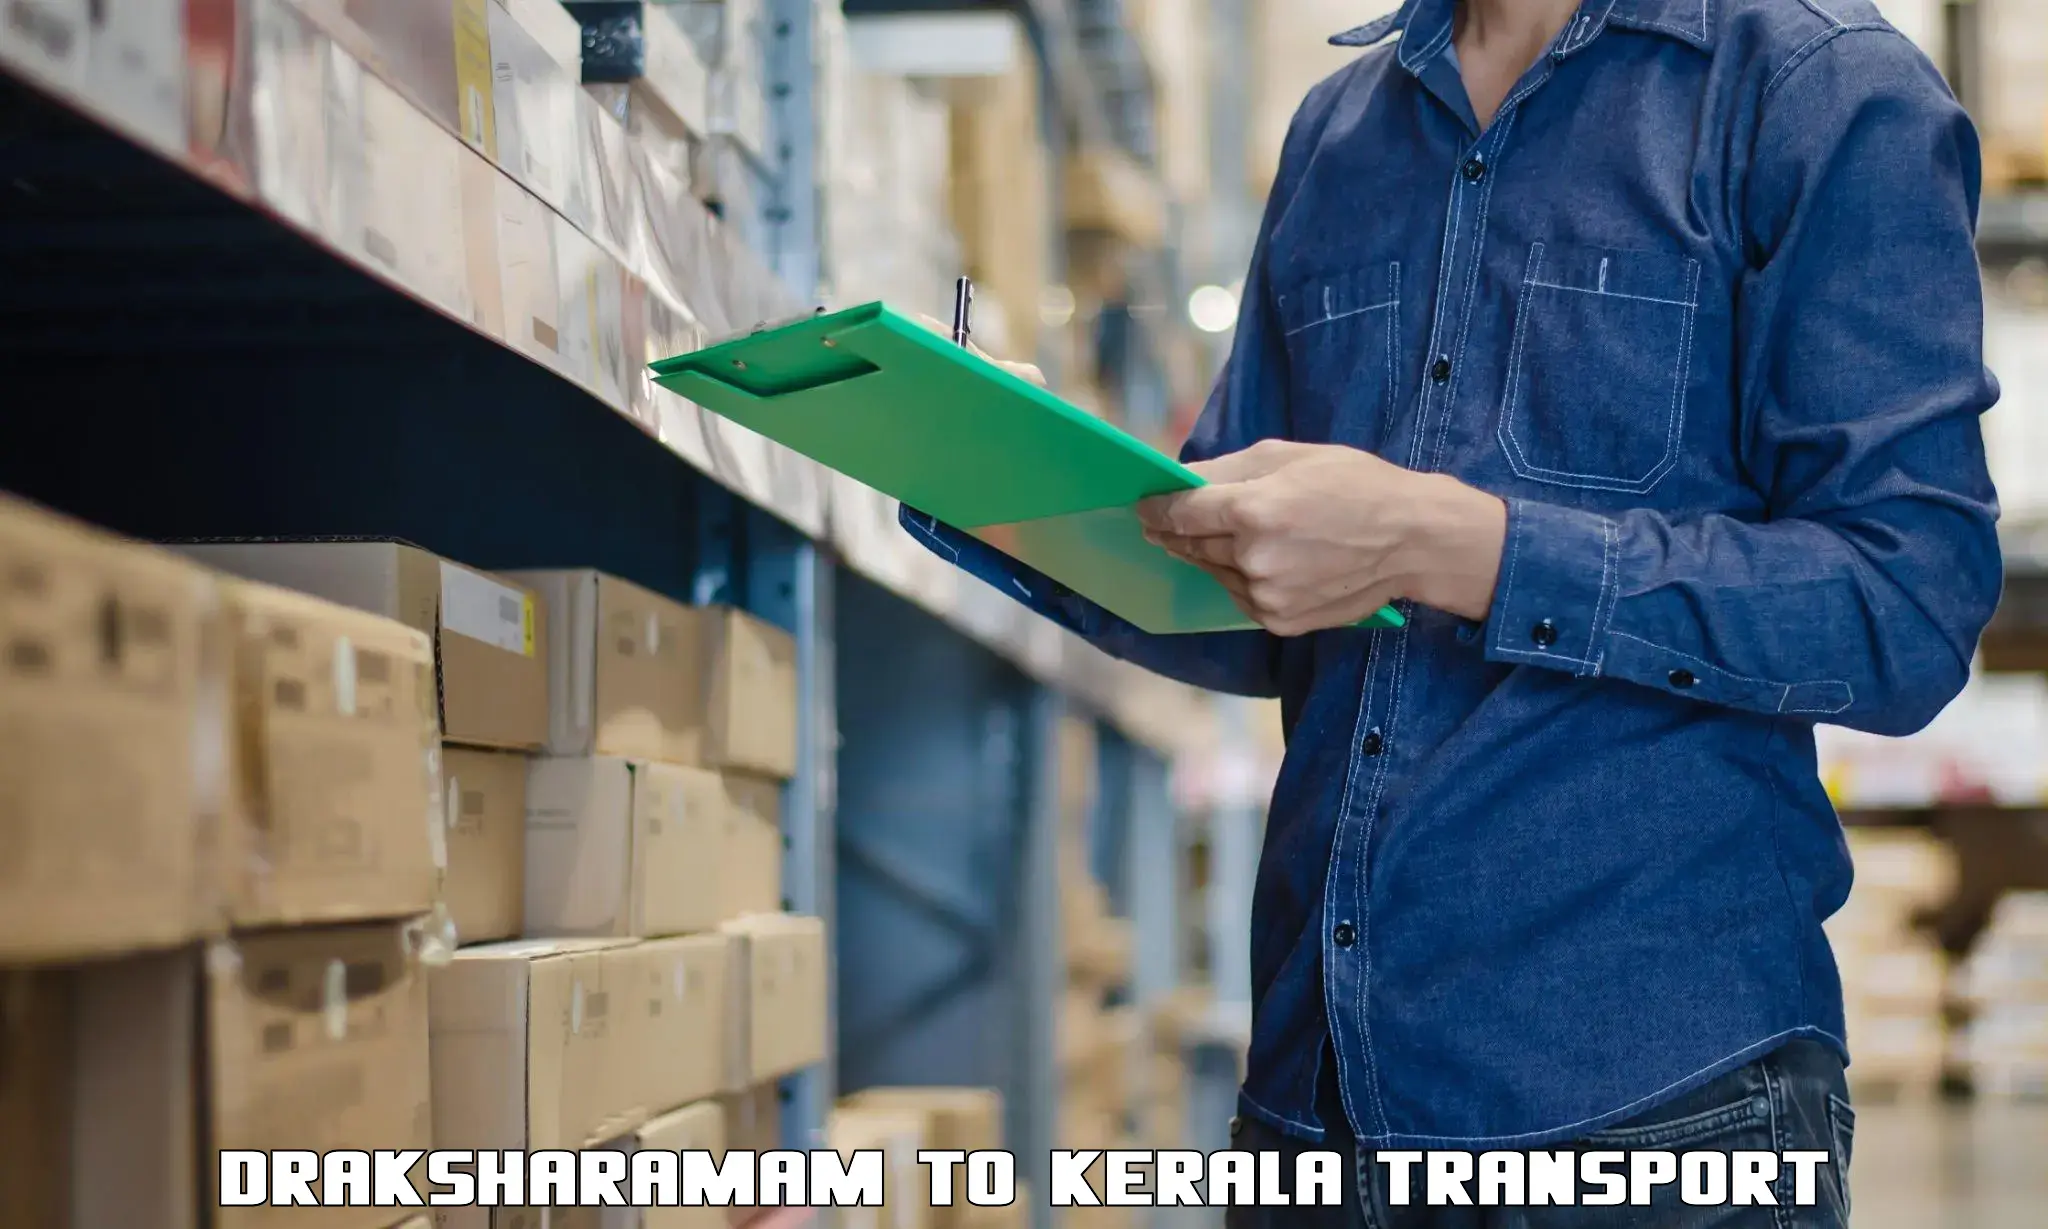 Nationwide transport services Draksharamam to Cochin University of Science and Technology